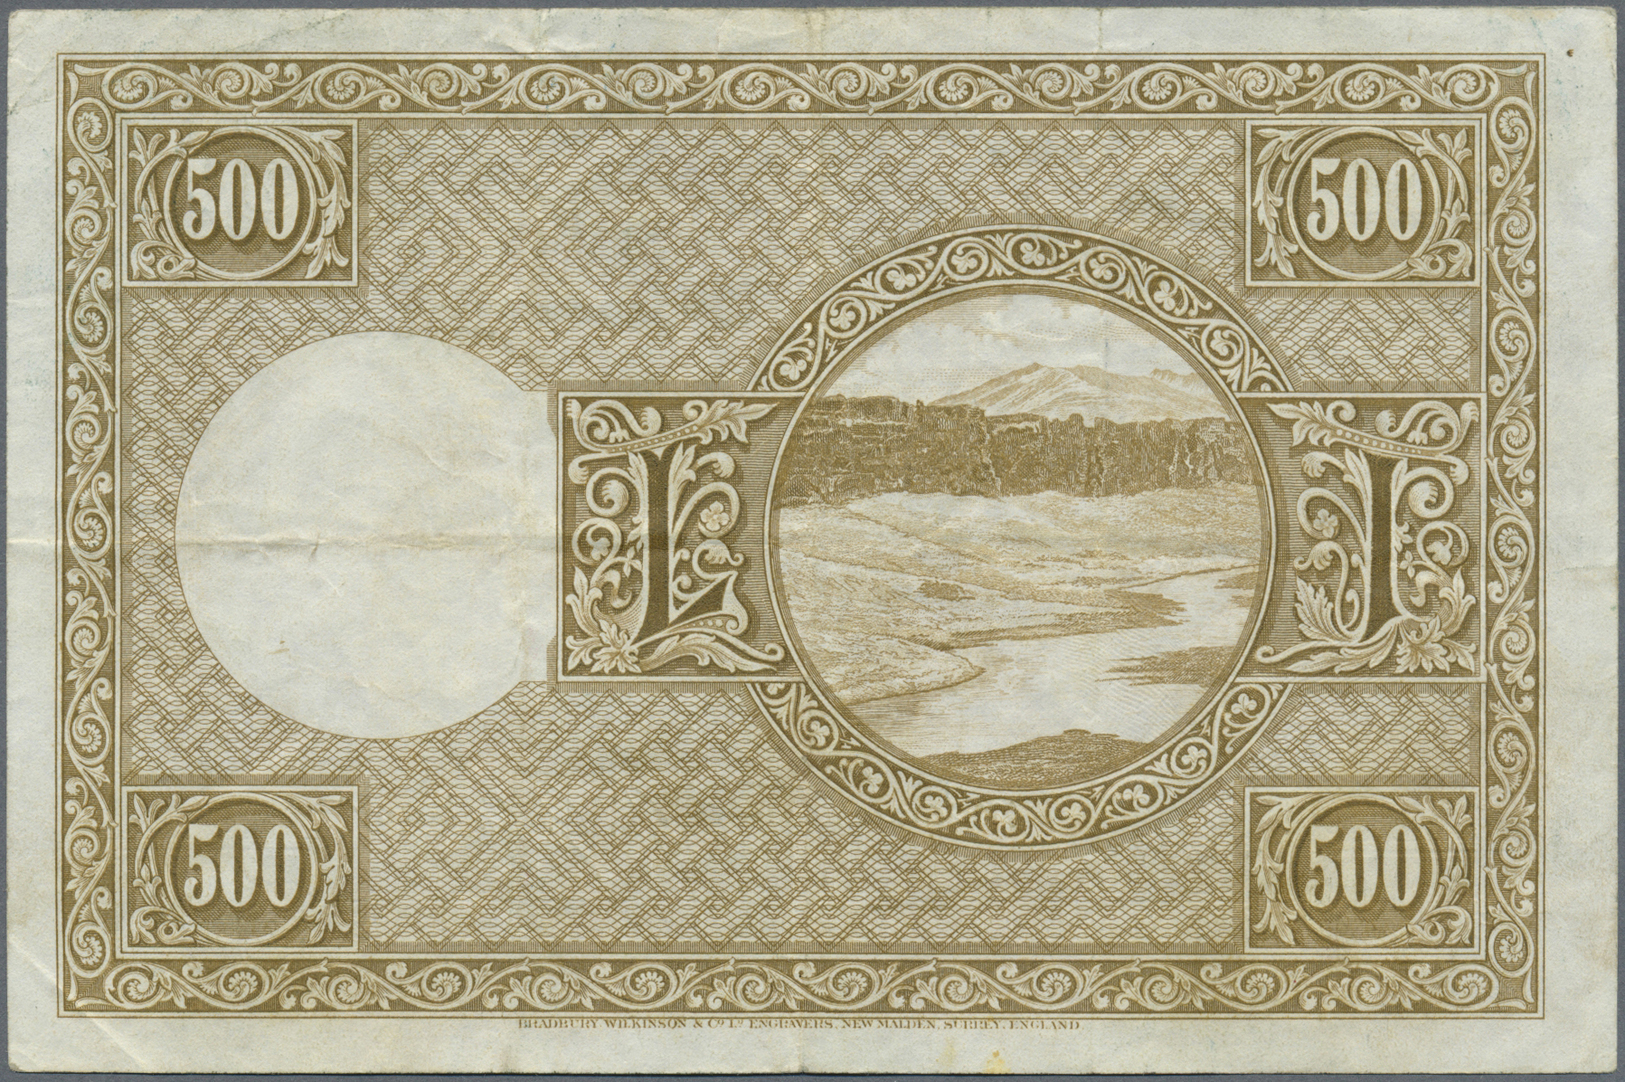 01025 Iceland / Island: 500 Kronur 1928 P. 36 In Used Condition With Several Folds, No Holes, 2 Minor Border Tears, Stil - Iceland